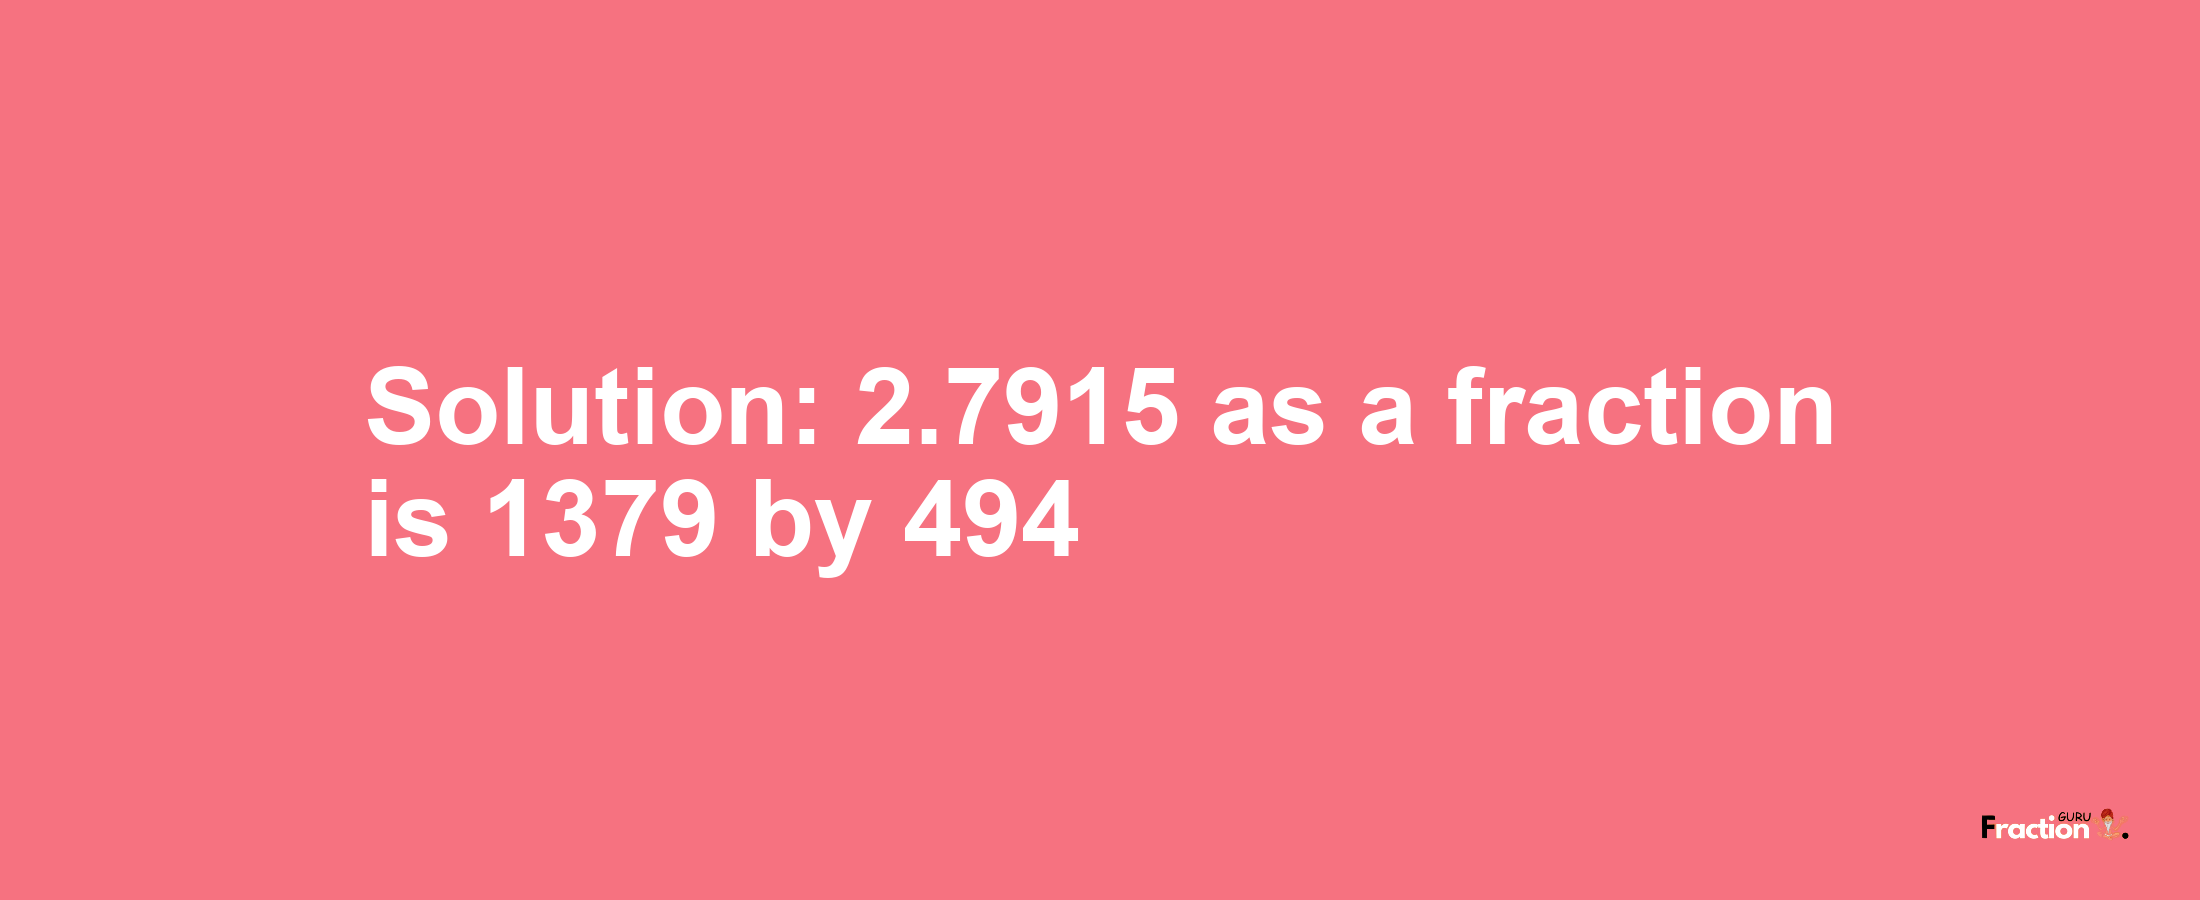 Solution:2.7915 as a fraction is 1379/494